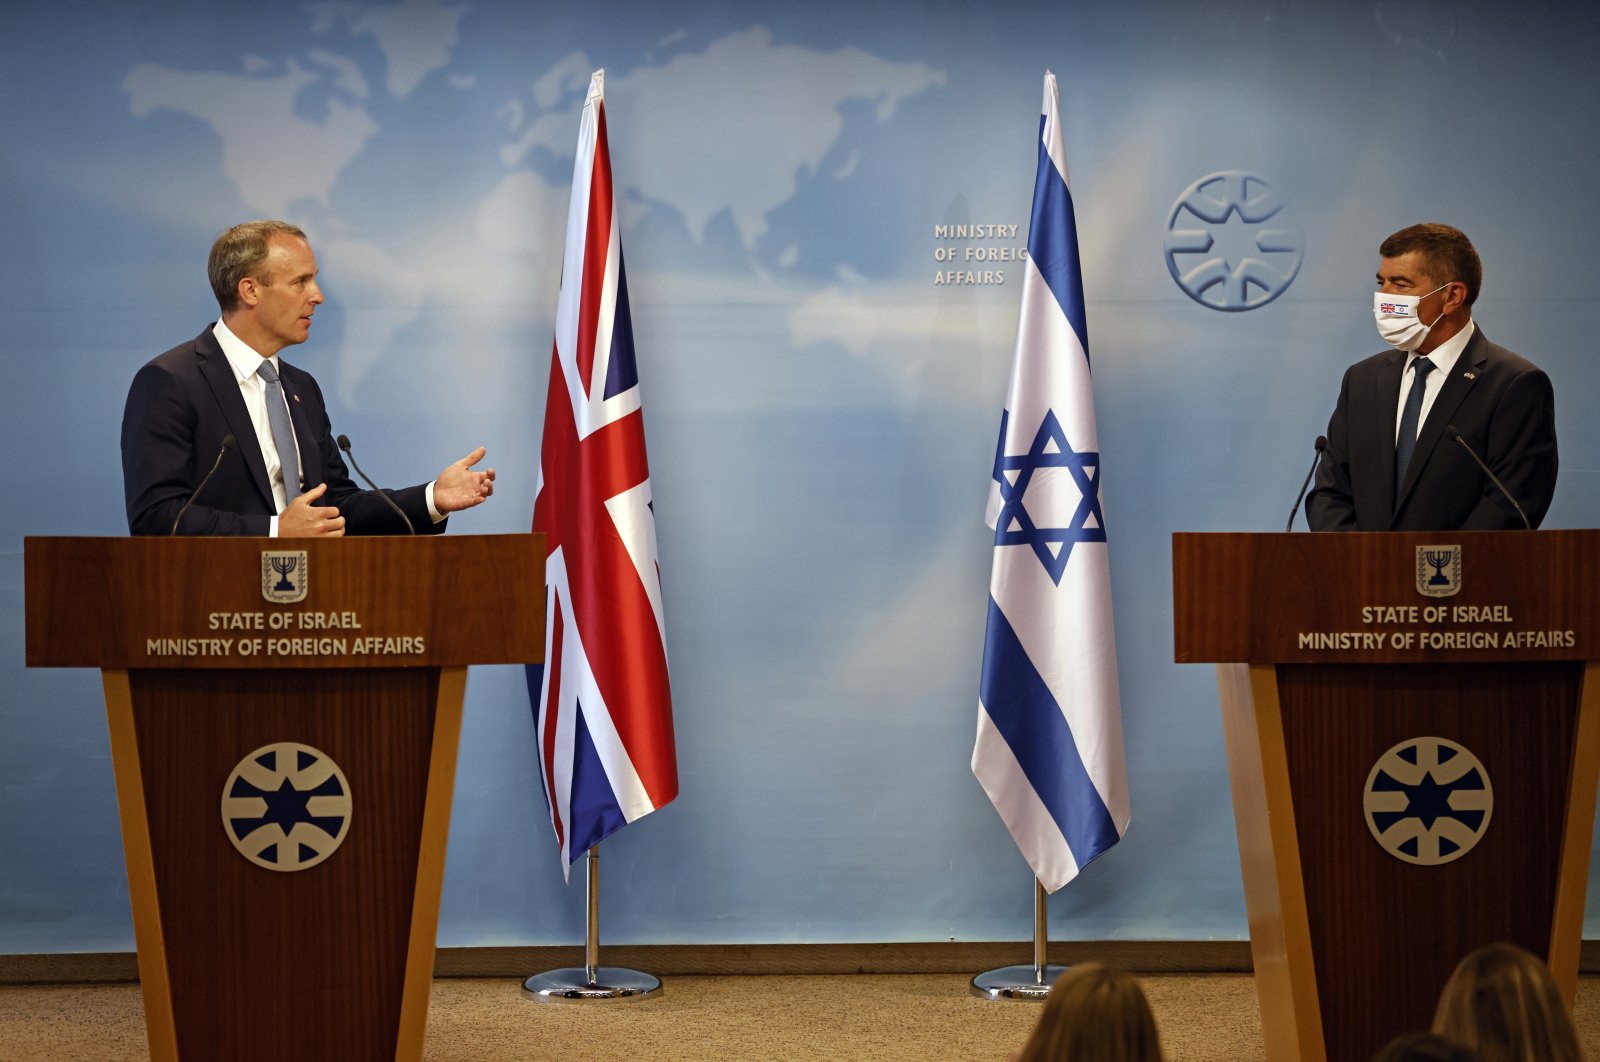 Israel's Foreign Minister Gabi Ashkenazi (R) and British Foreign Secretary Dominic Raab (L) hold a joint news conference after their meeting in Jerusalem, Israel, Aug. 25, 2020. (EPA Photo)